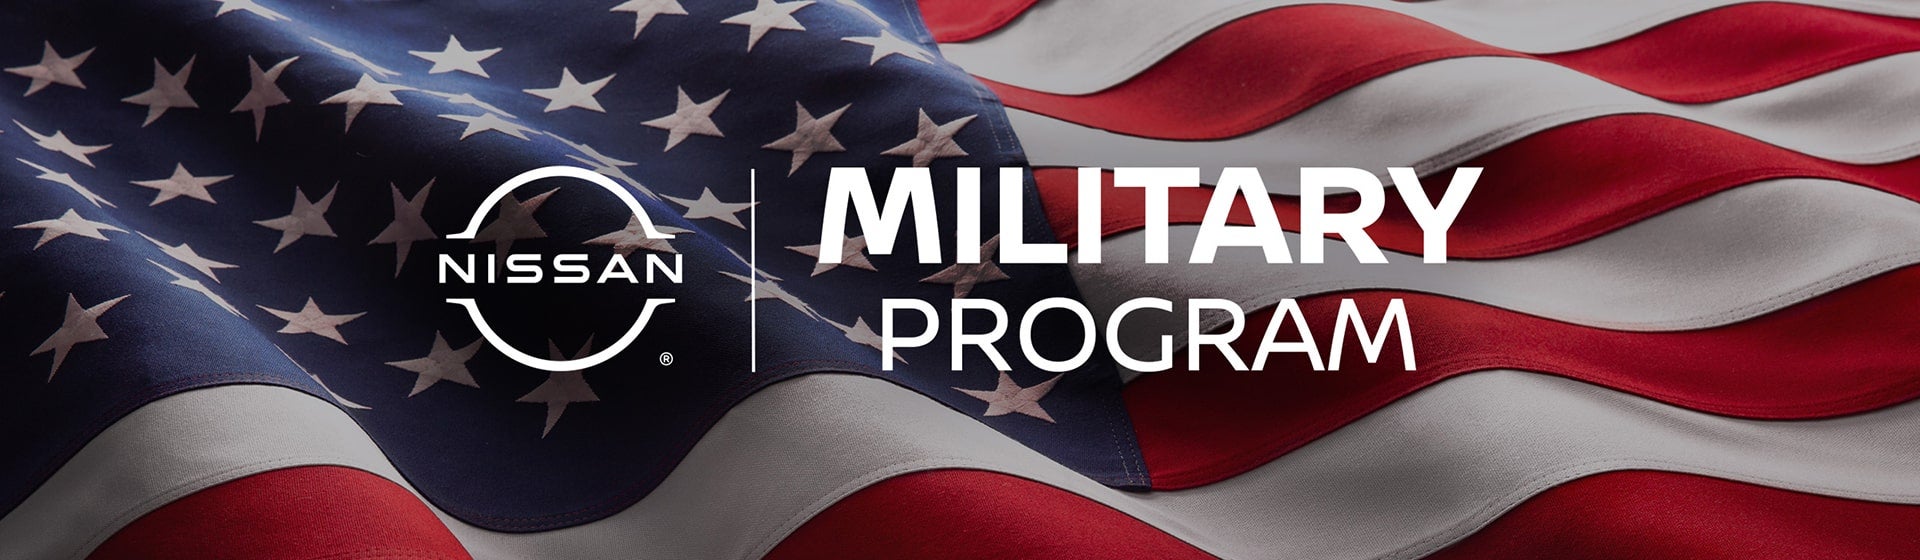 Nissan Military Discount | Courtesy Nissan PA in Altoona PA